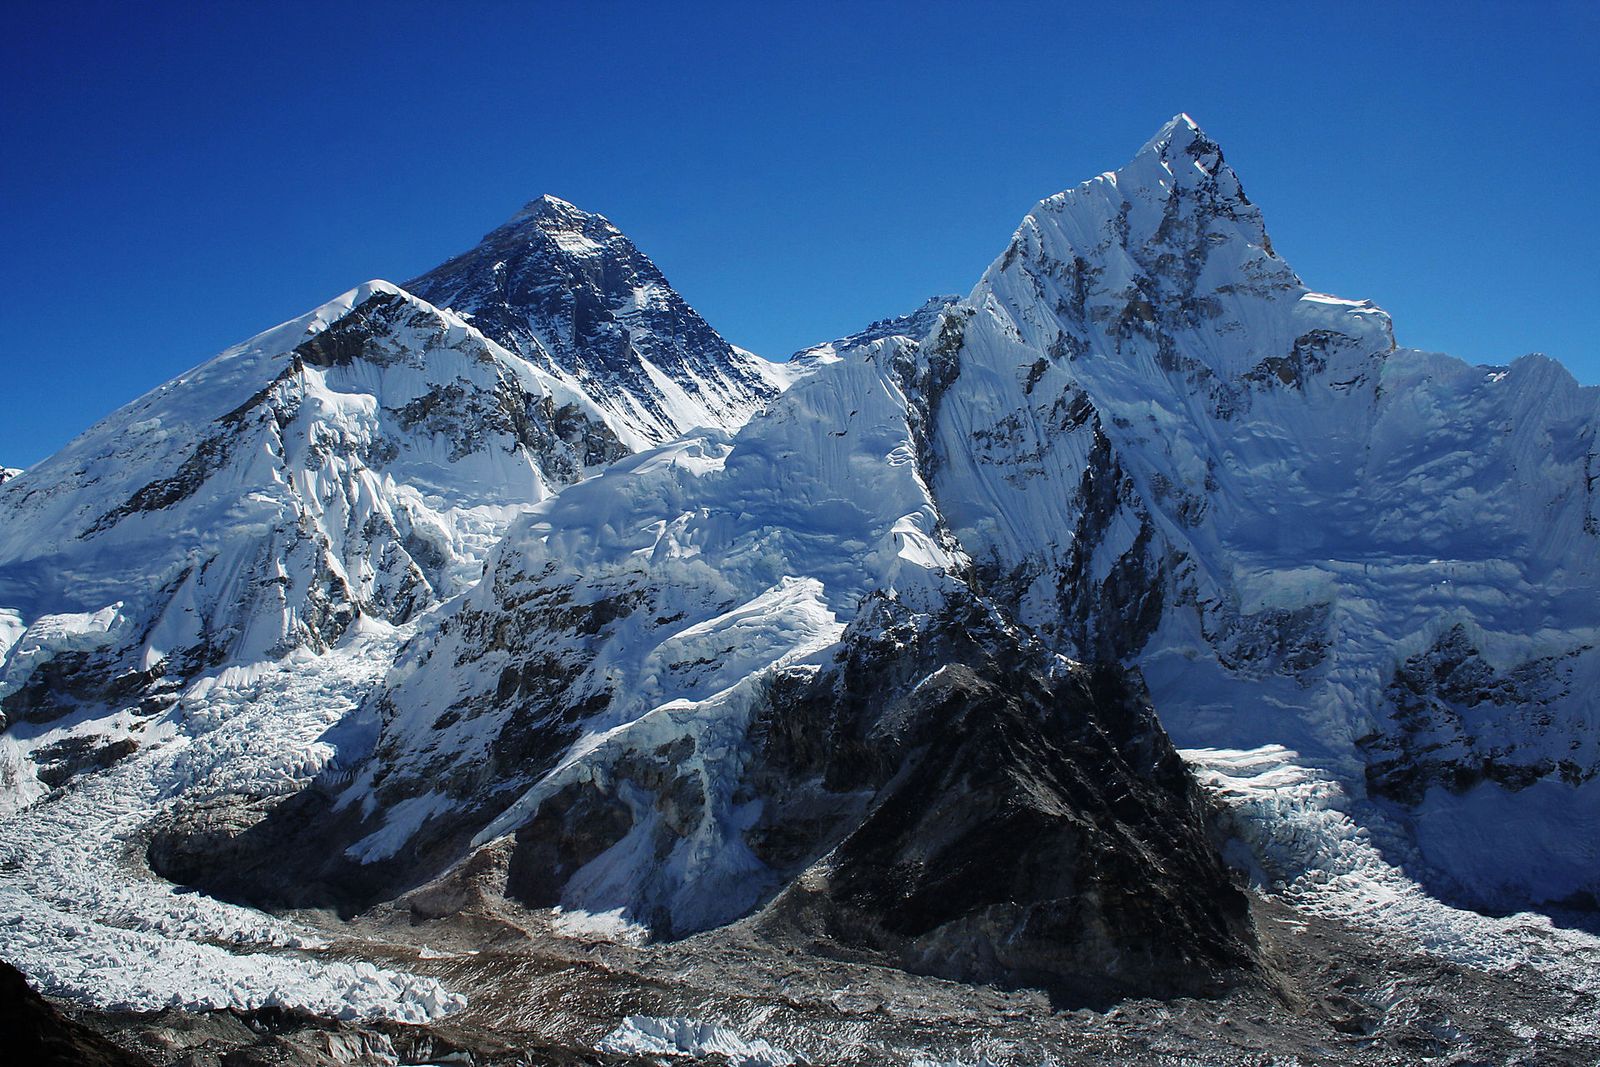 Did an Earthquake Make Mount Everest Shorter? New Expedition Aims